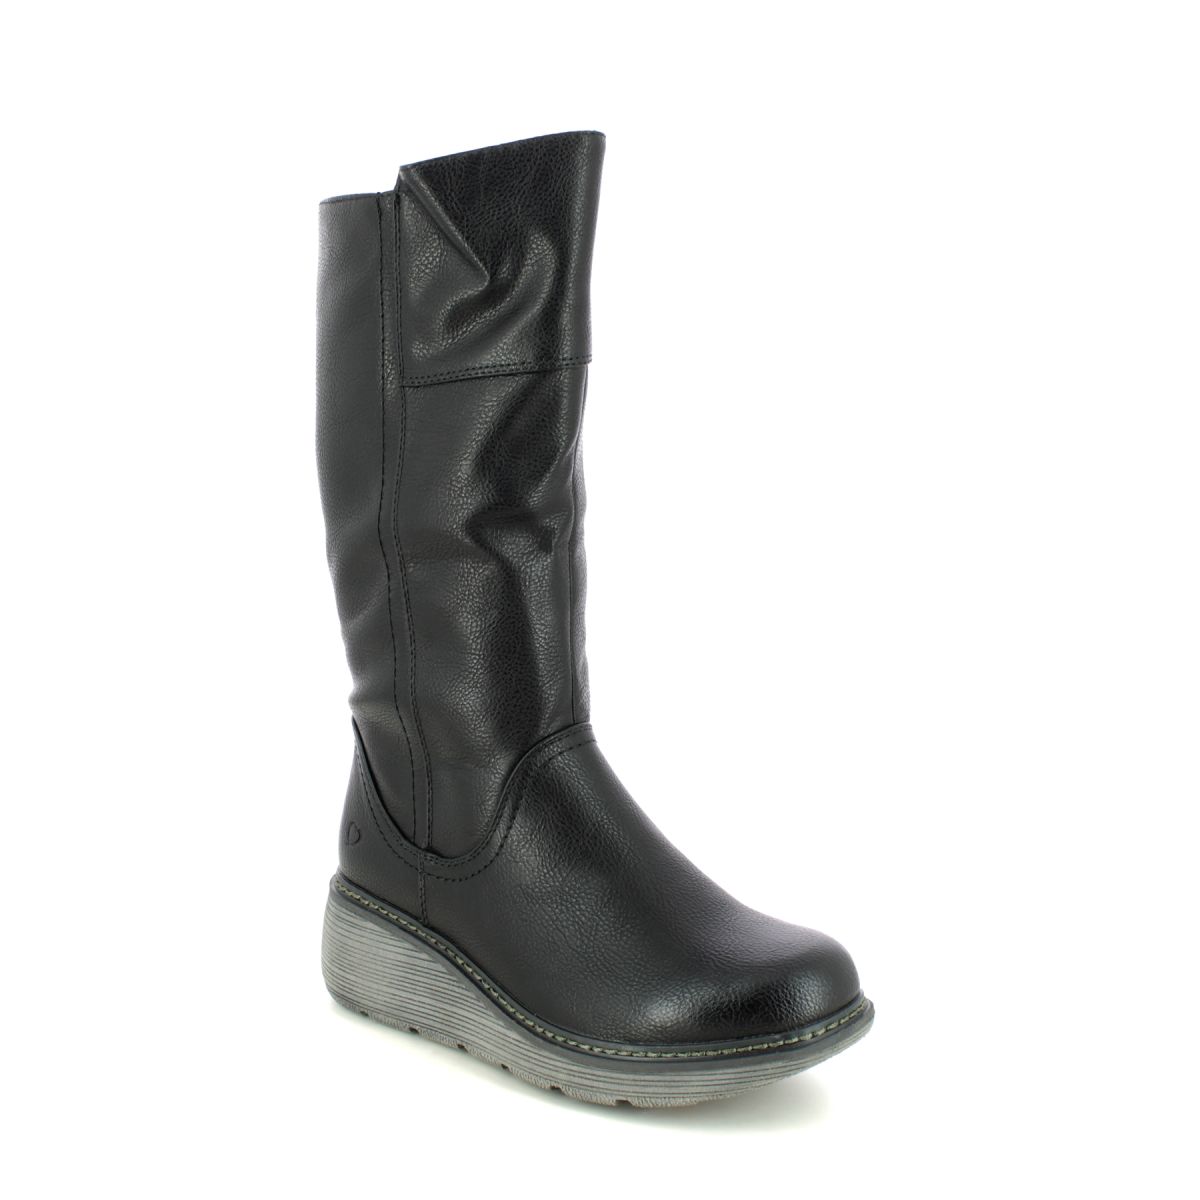 Heavenly Feet Lombardy Wedge Black Womens Mid Calf Boots 3005-34 In Size 5 In Plain Black